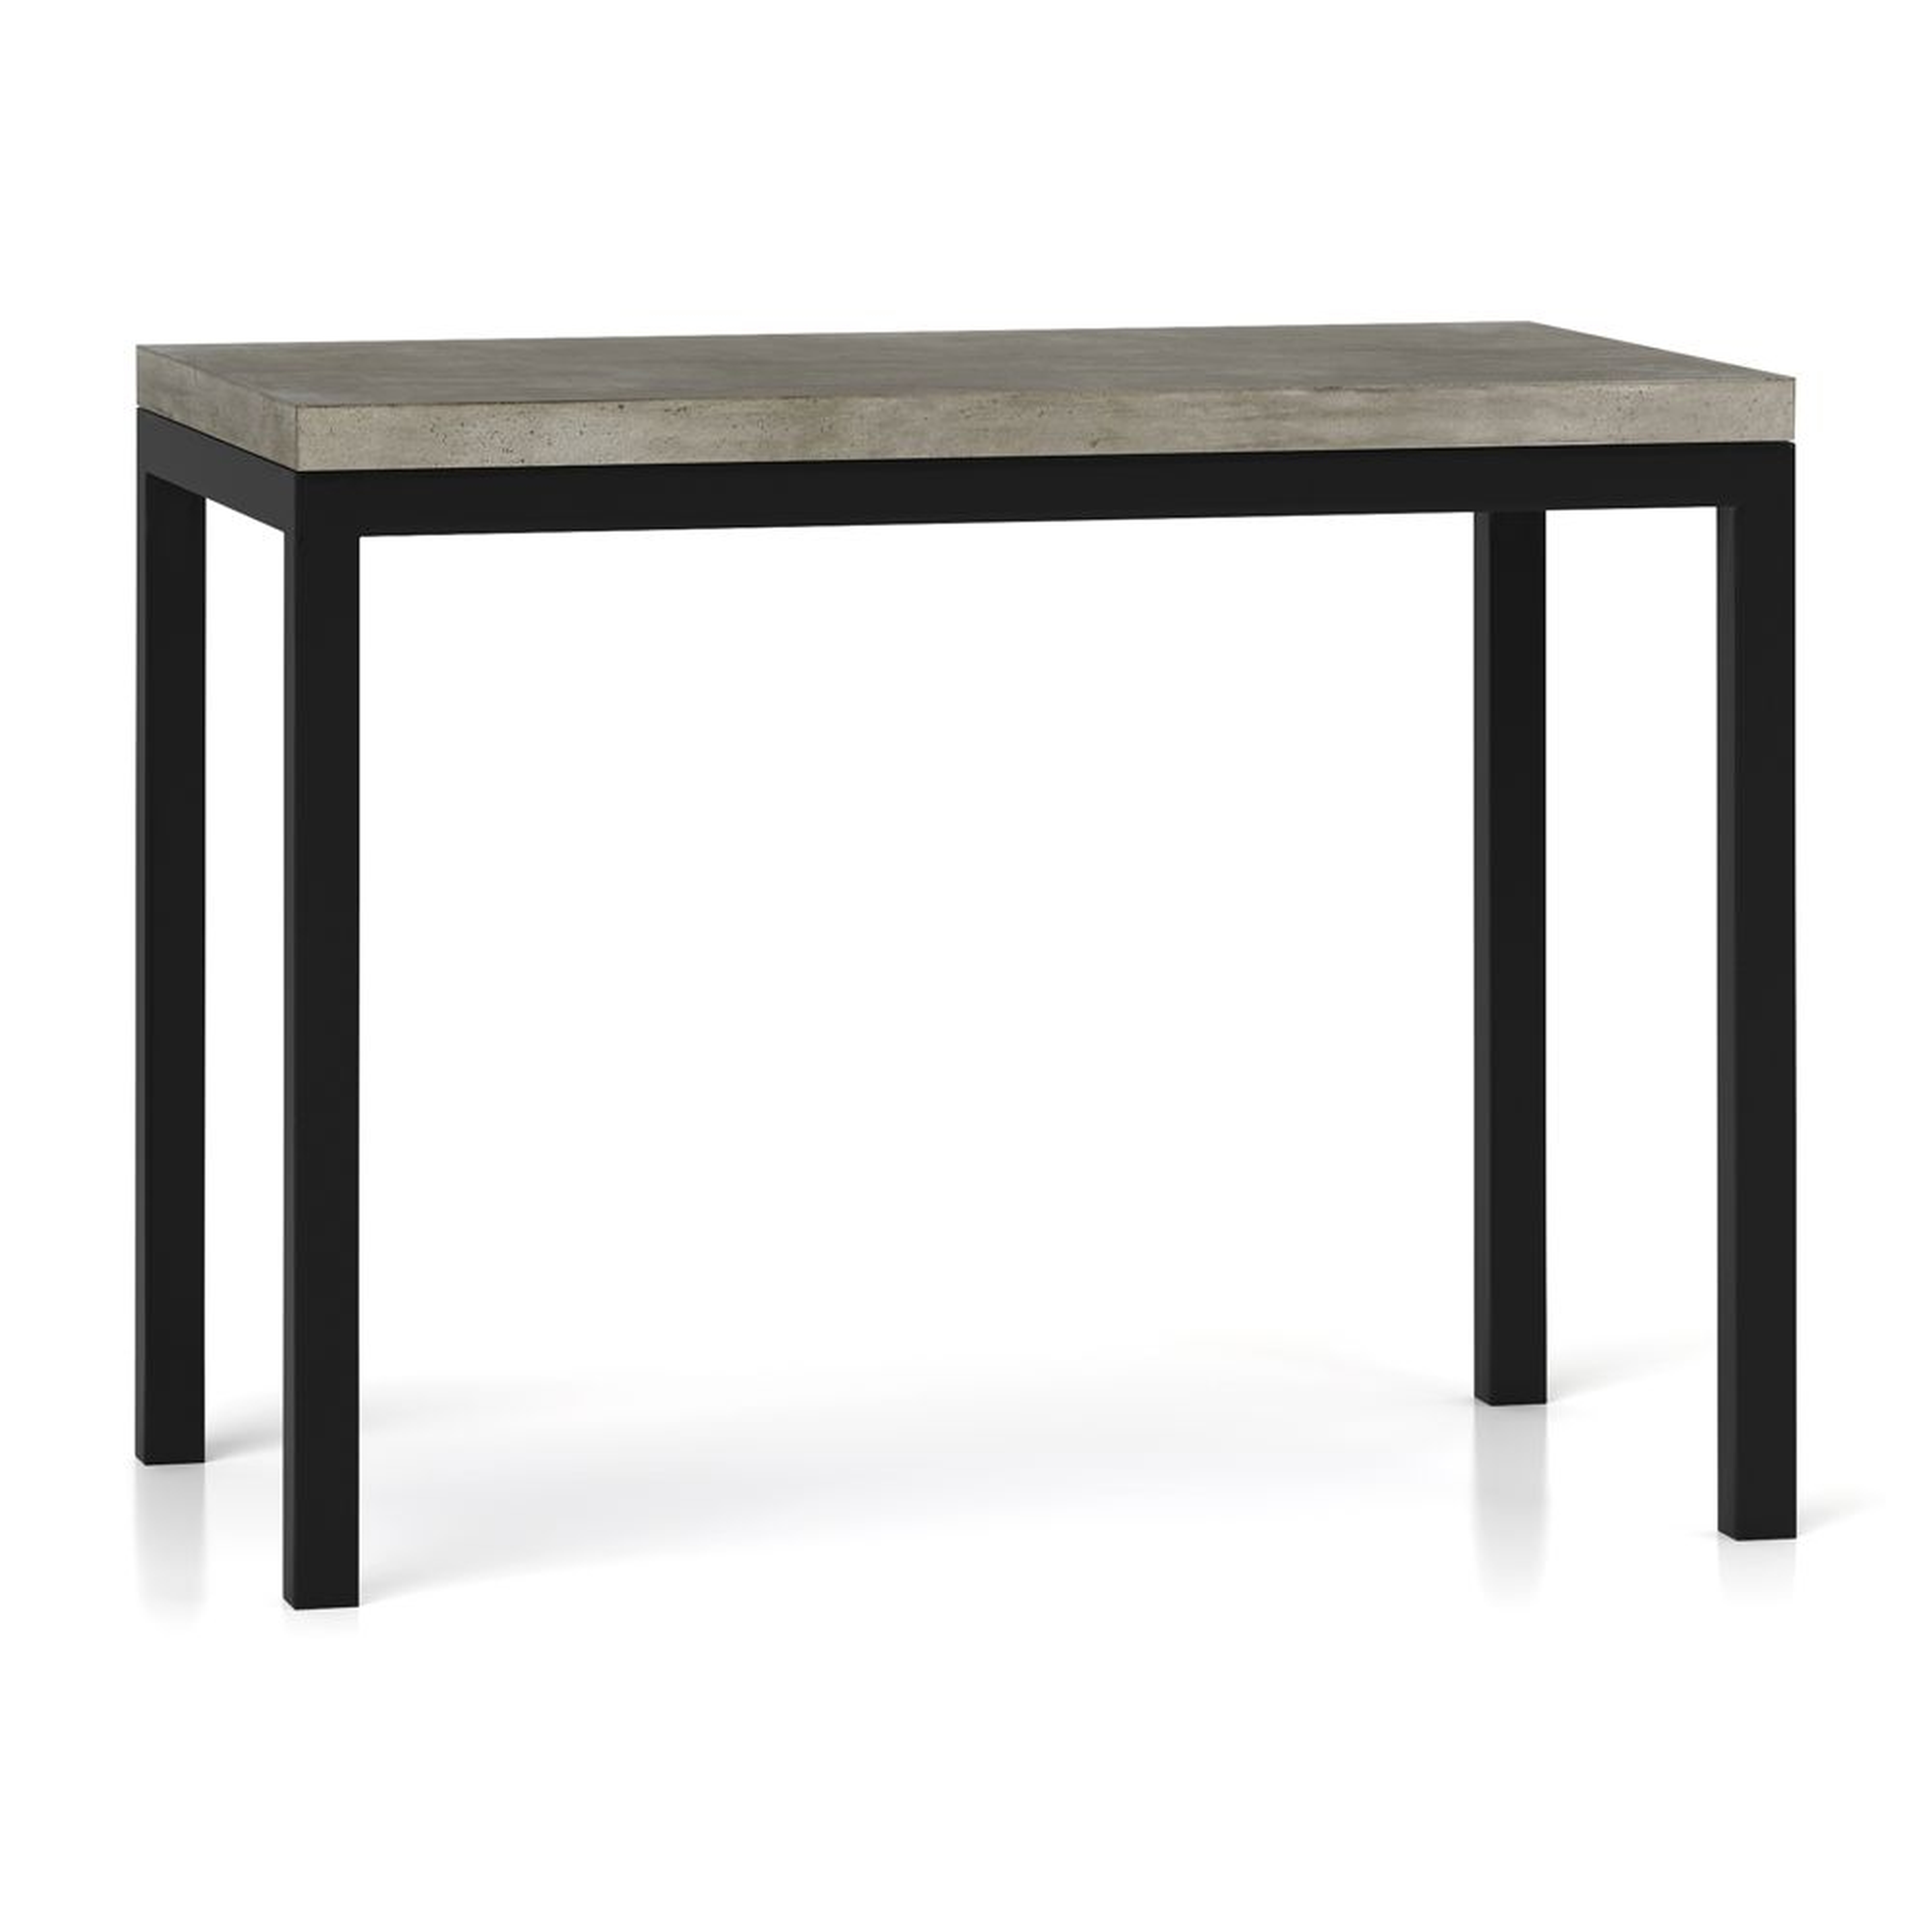 Parsons Concrete Top/ Dark Steel Base 48x28 High Dining Table - Crate and Barrel